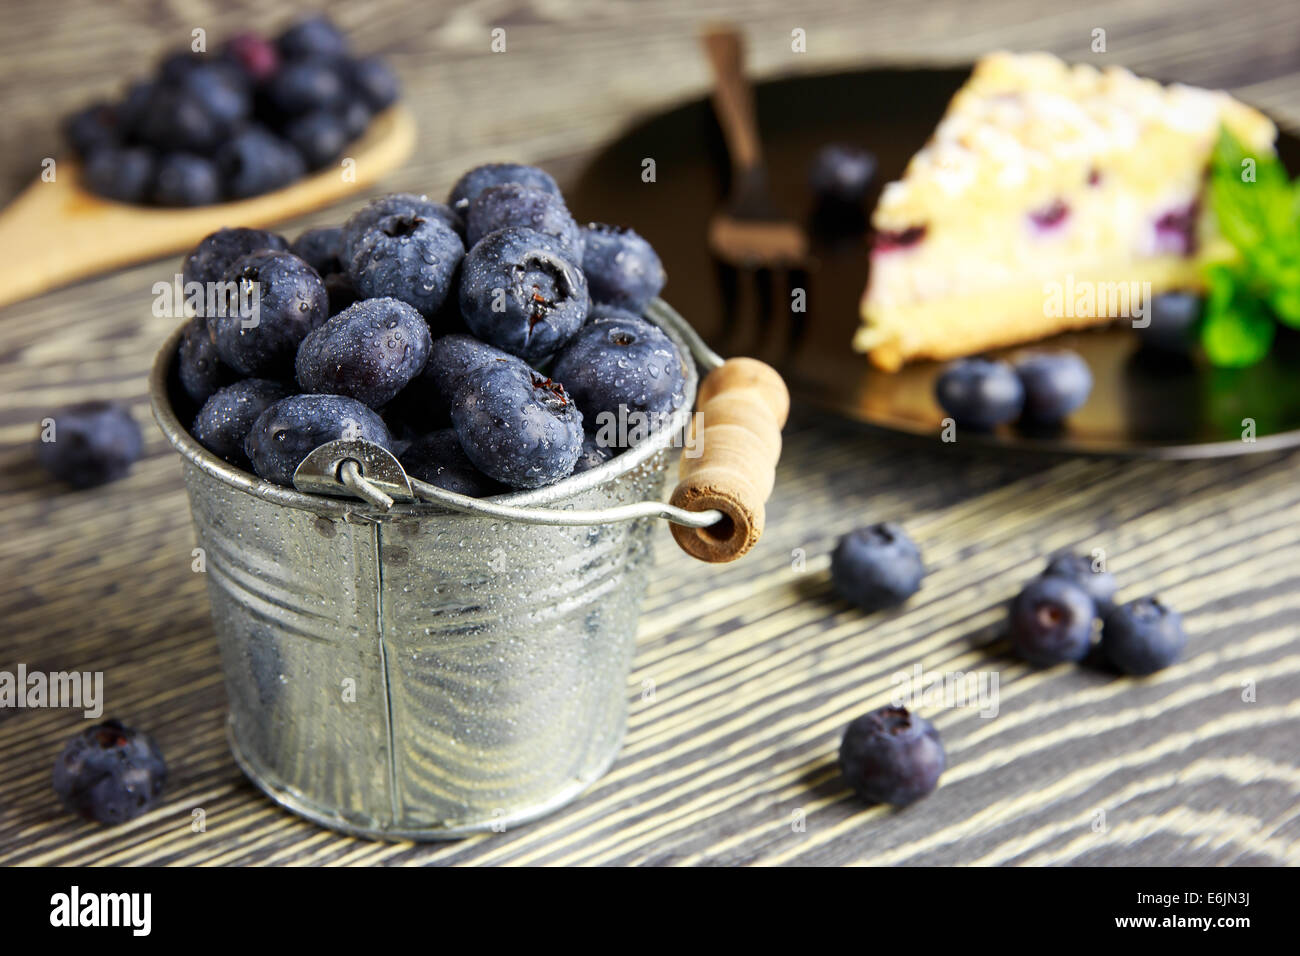 Blueberry cake and fresh fruits arranged on a wooden table Stock Photo